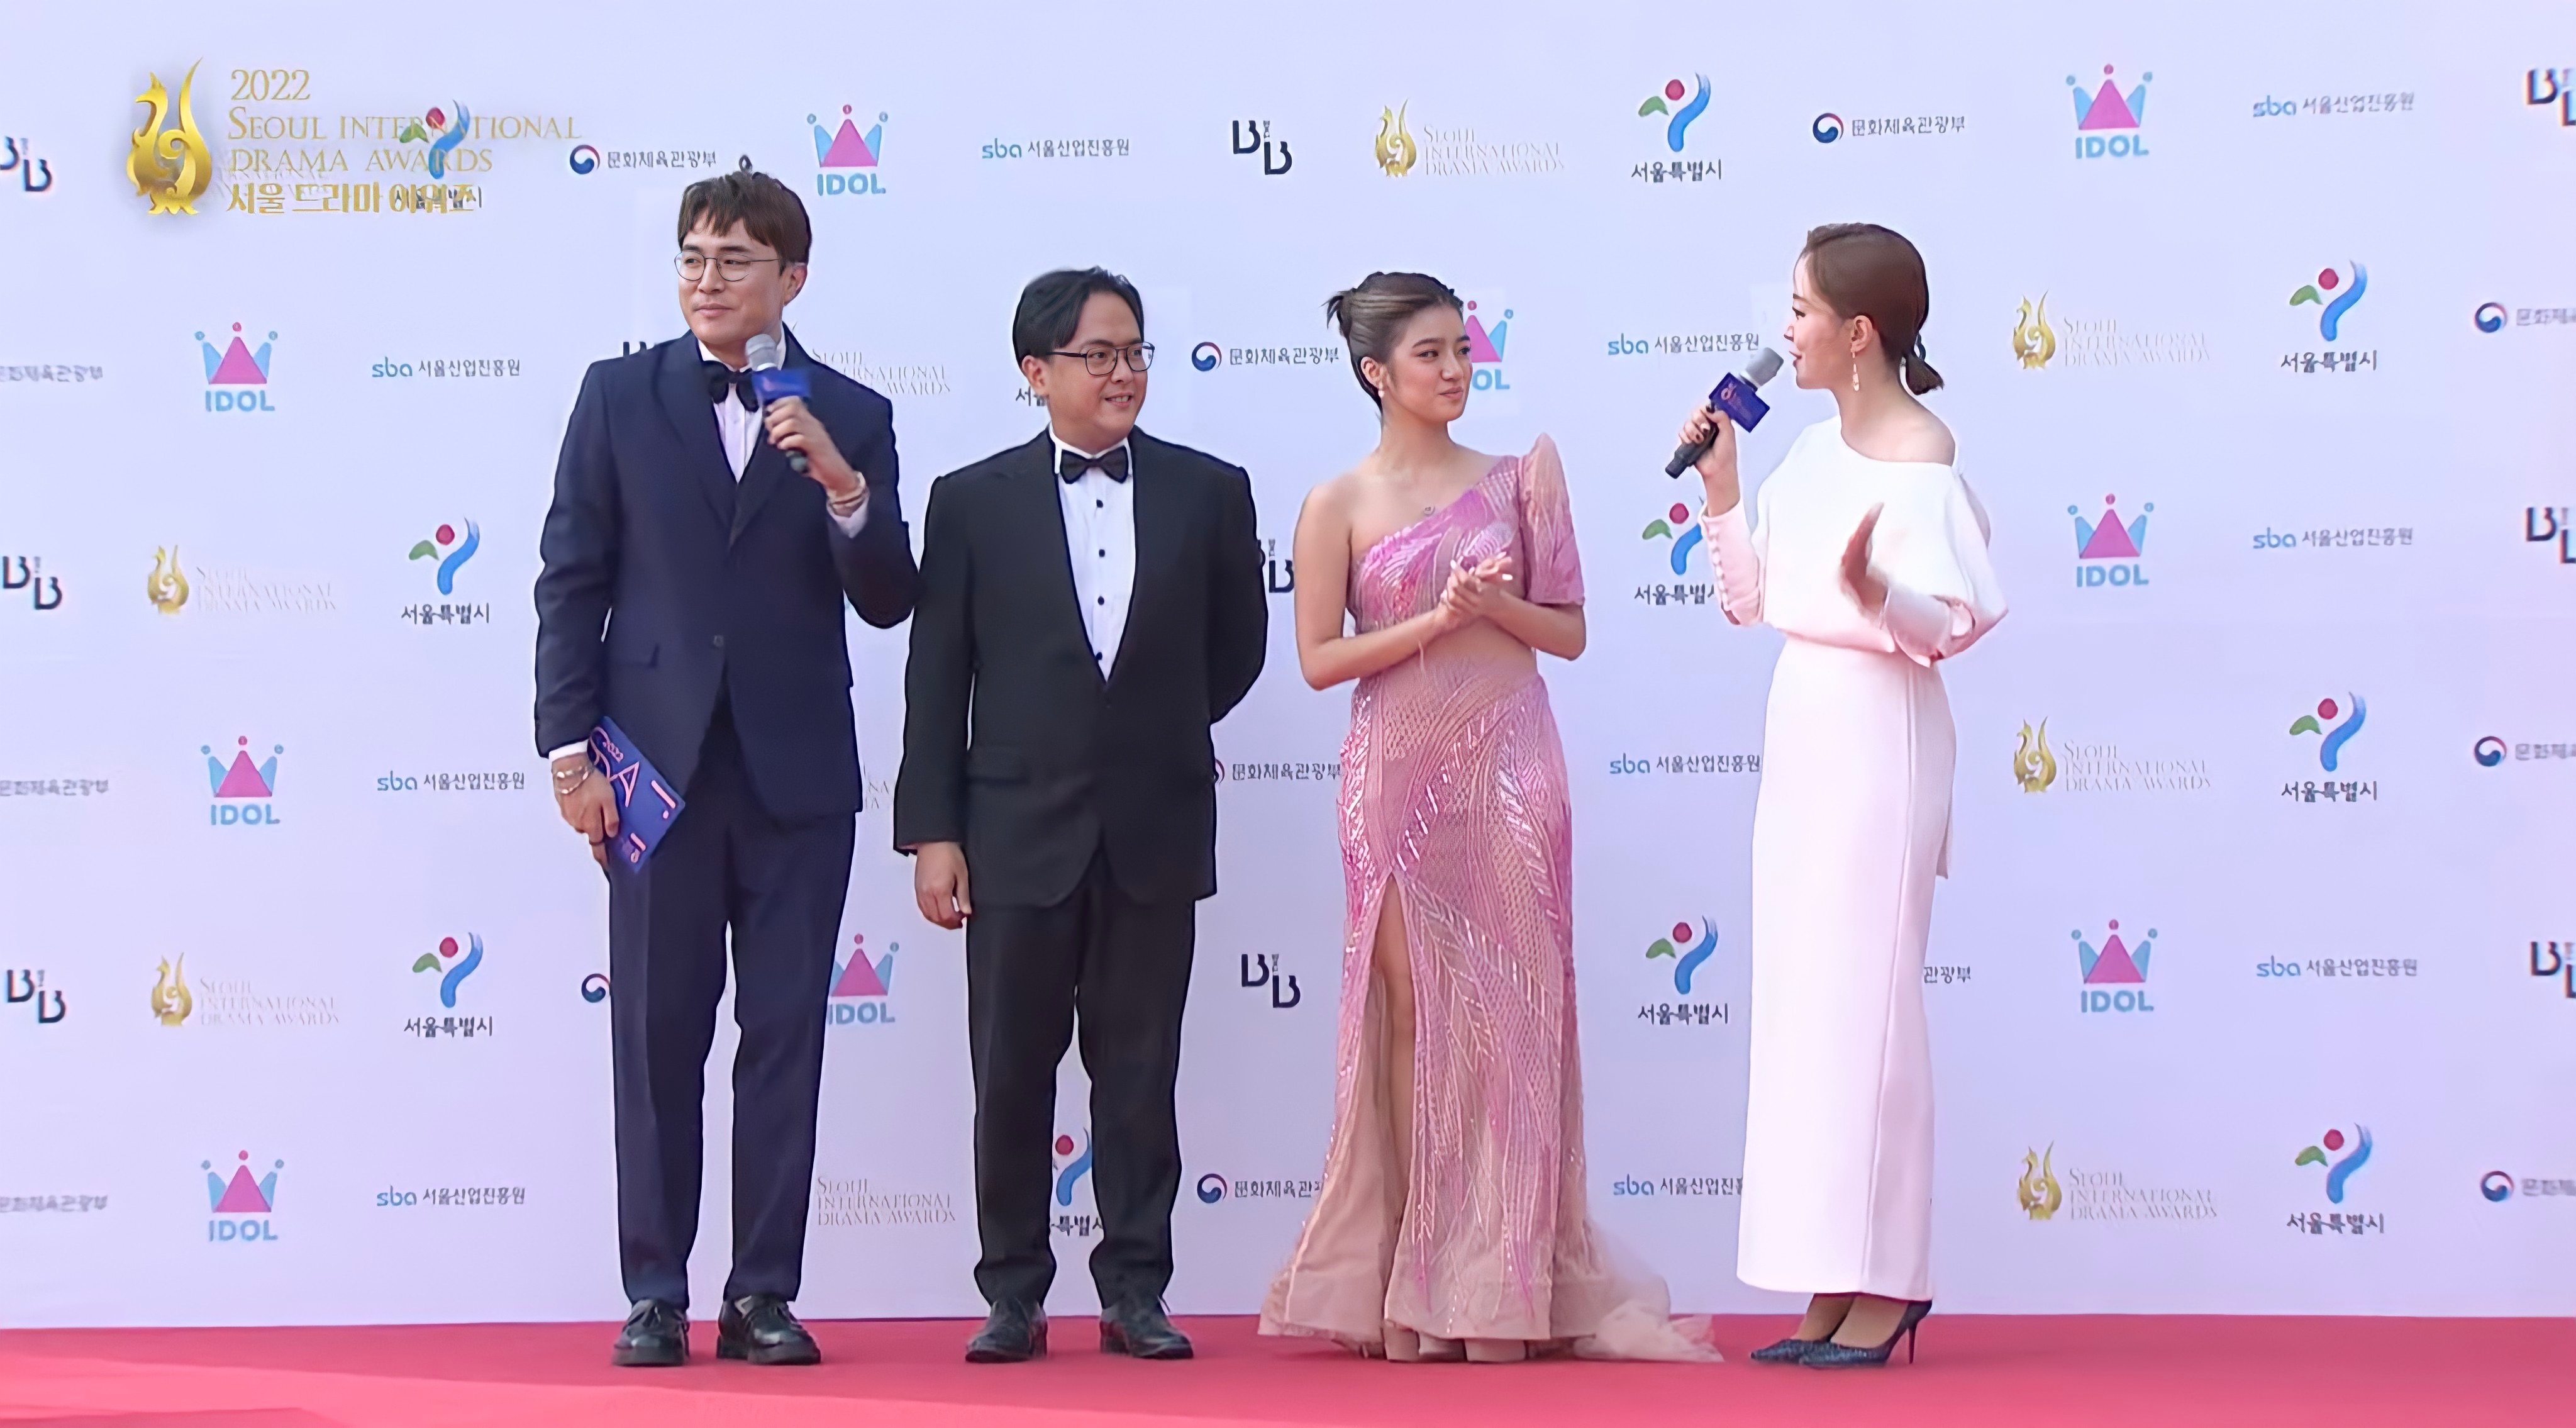 LOOK Belle Mariano at the 17th Seoul International Drama Awards